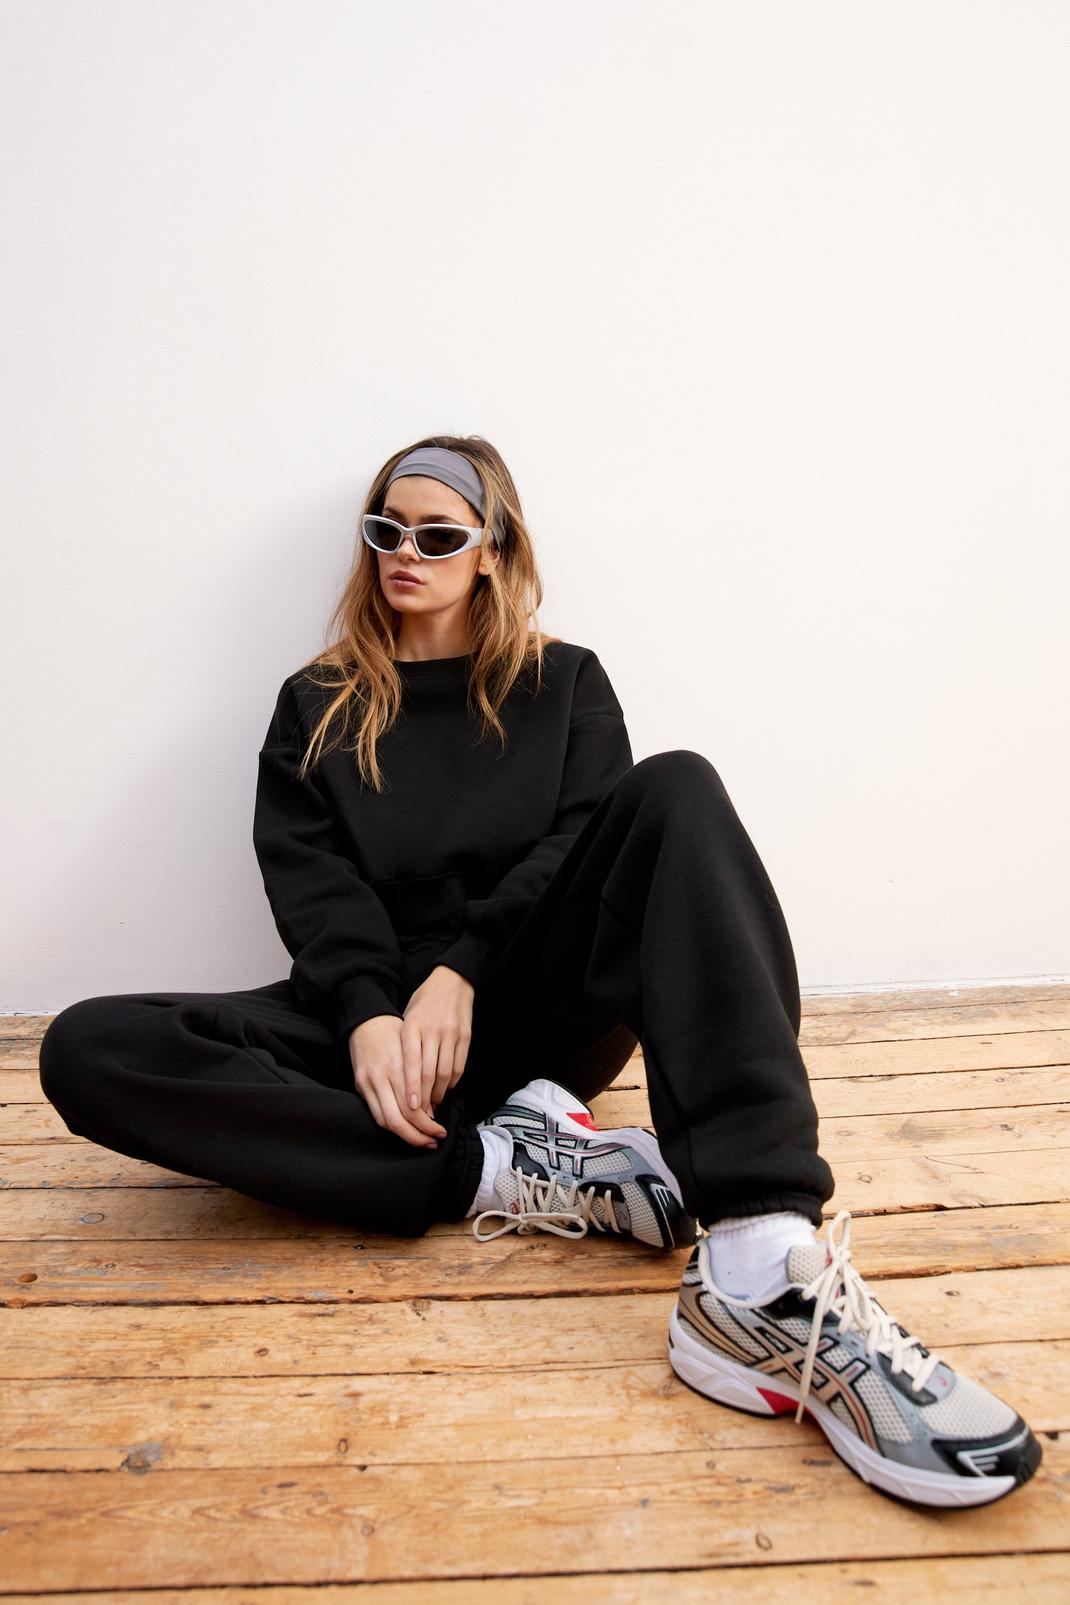 THE GREAT. The Wide Leg Cropped Sweatpants